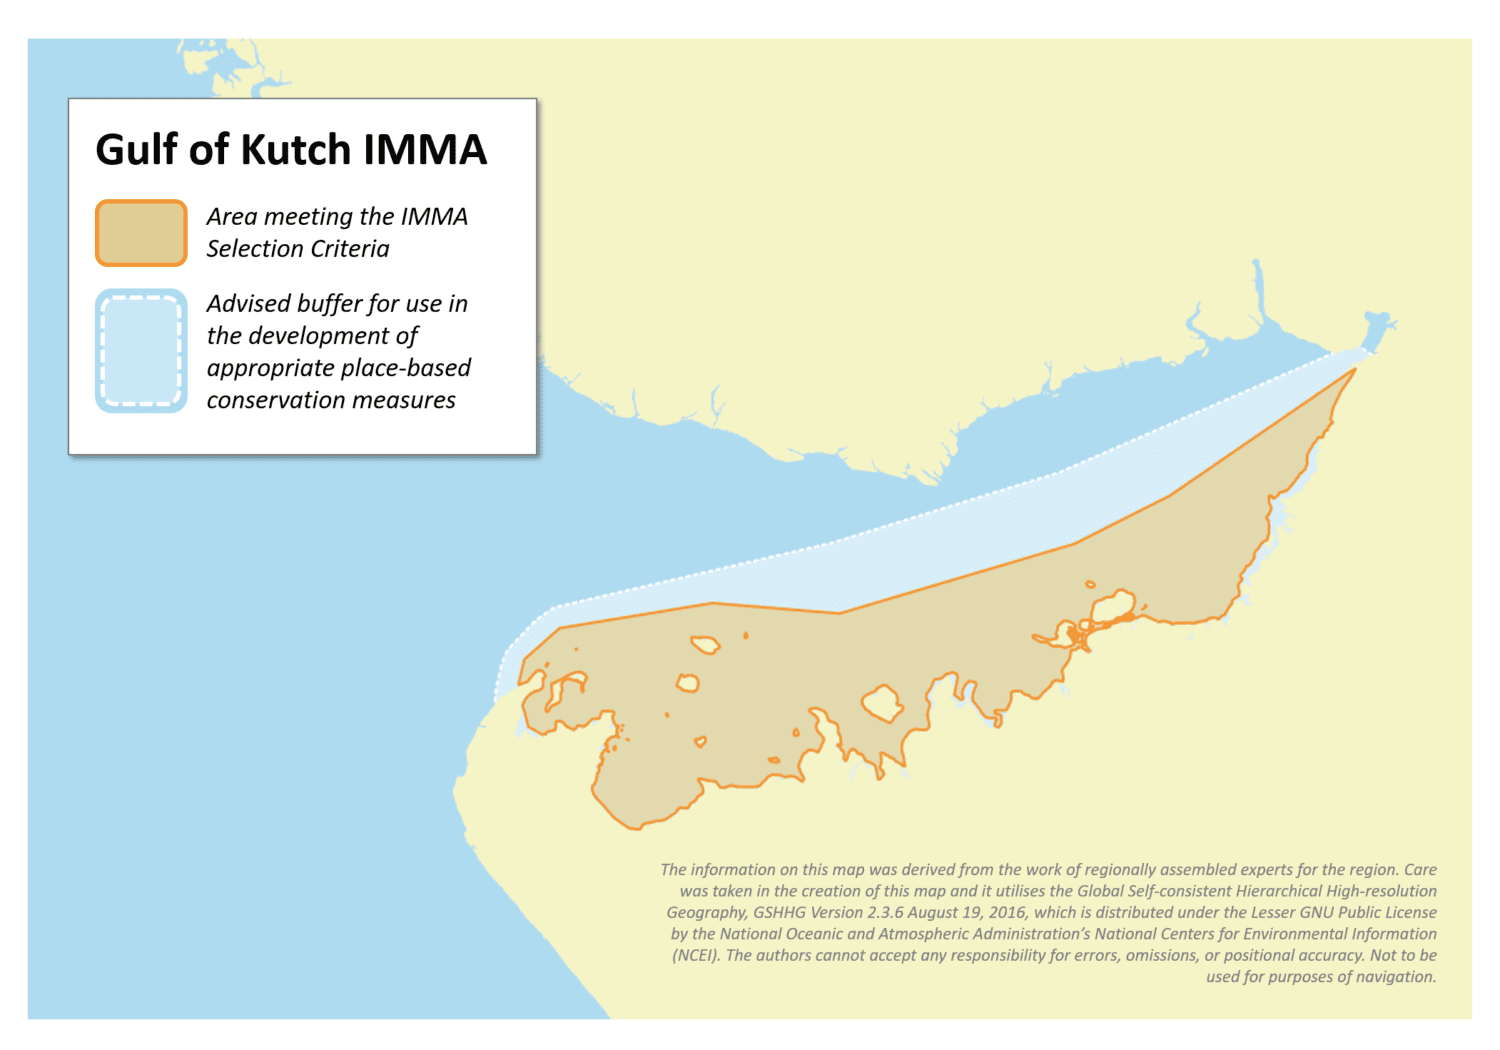 Gulf of Kutch IMMA - Marine Mammal Protected Areas Task Force